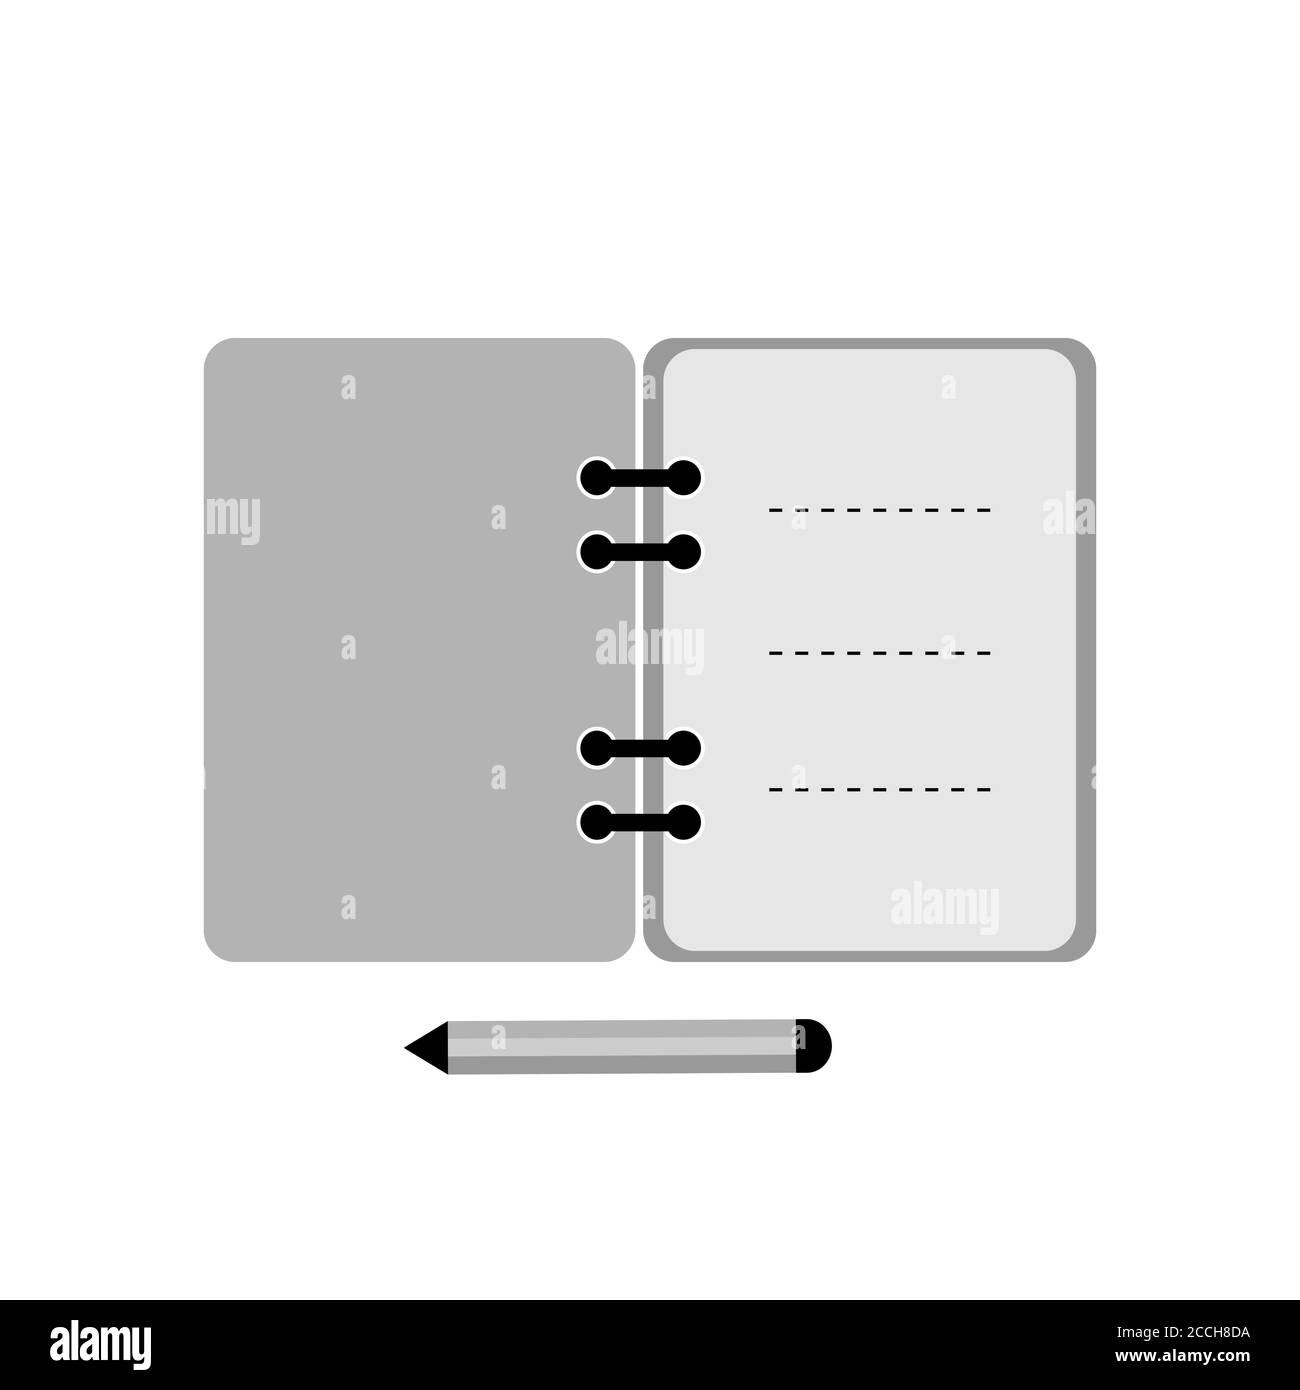 Exercise Book With Pen Icon. Flat Illustration in shades of grey color. Vector Stock Vector